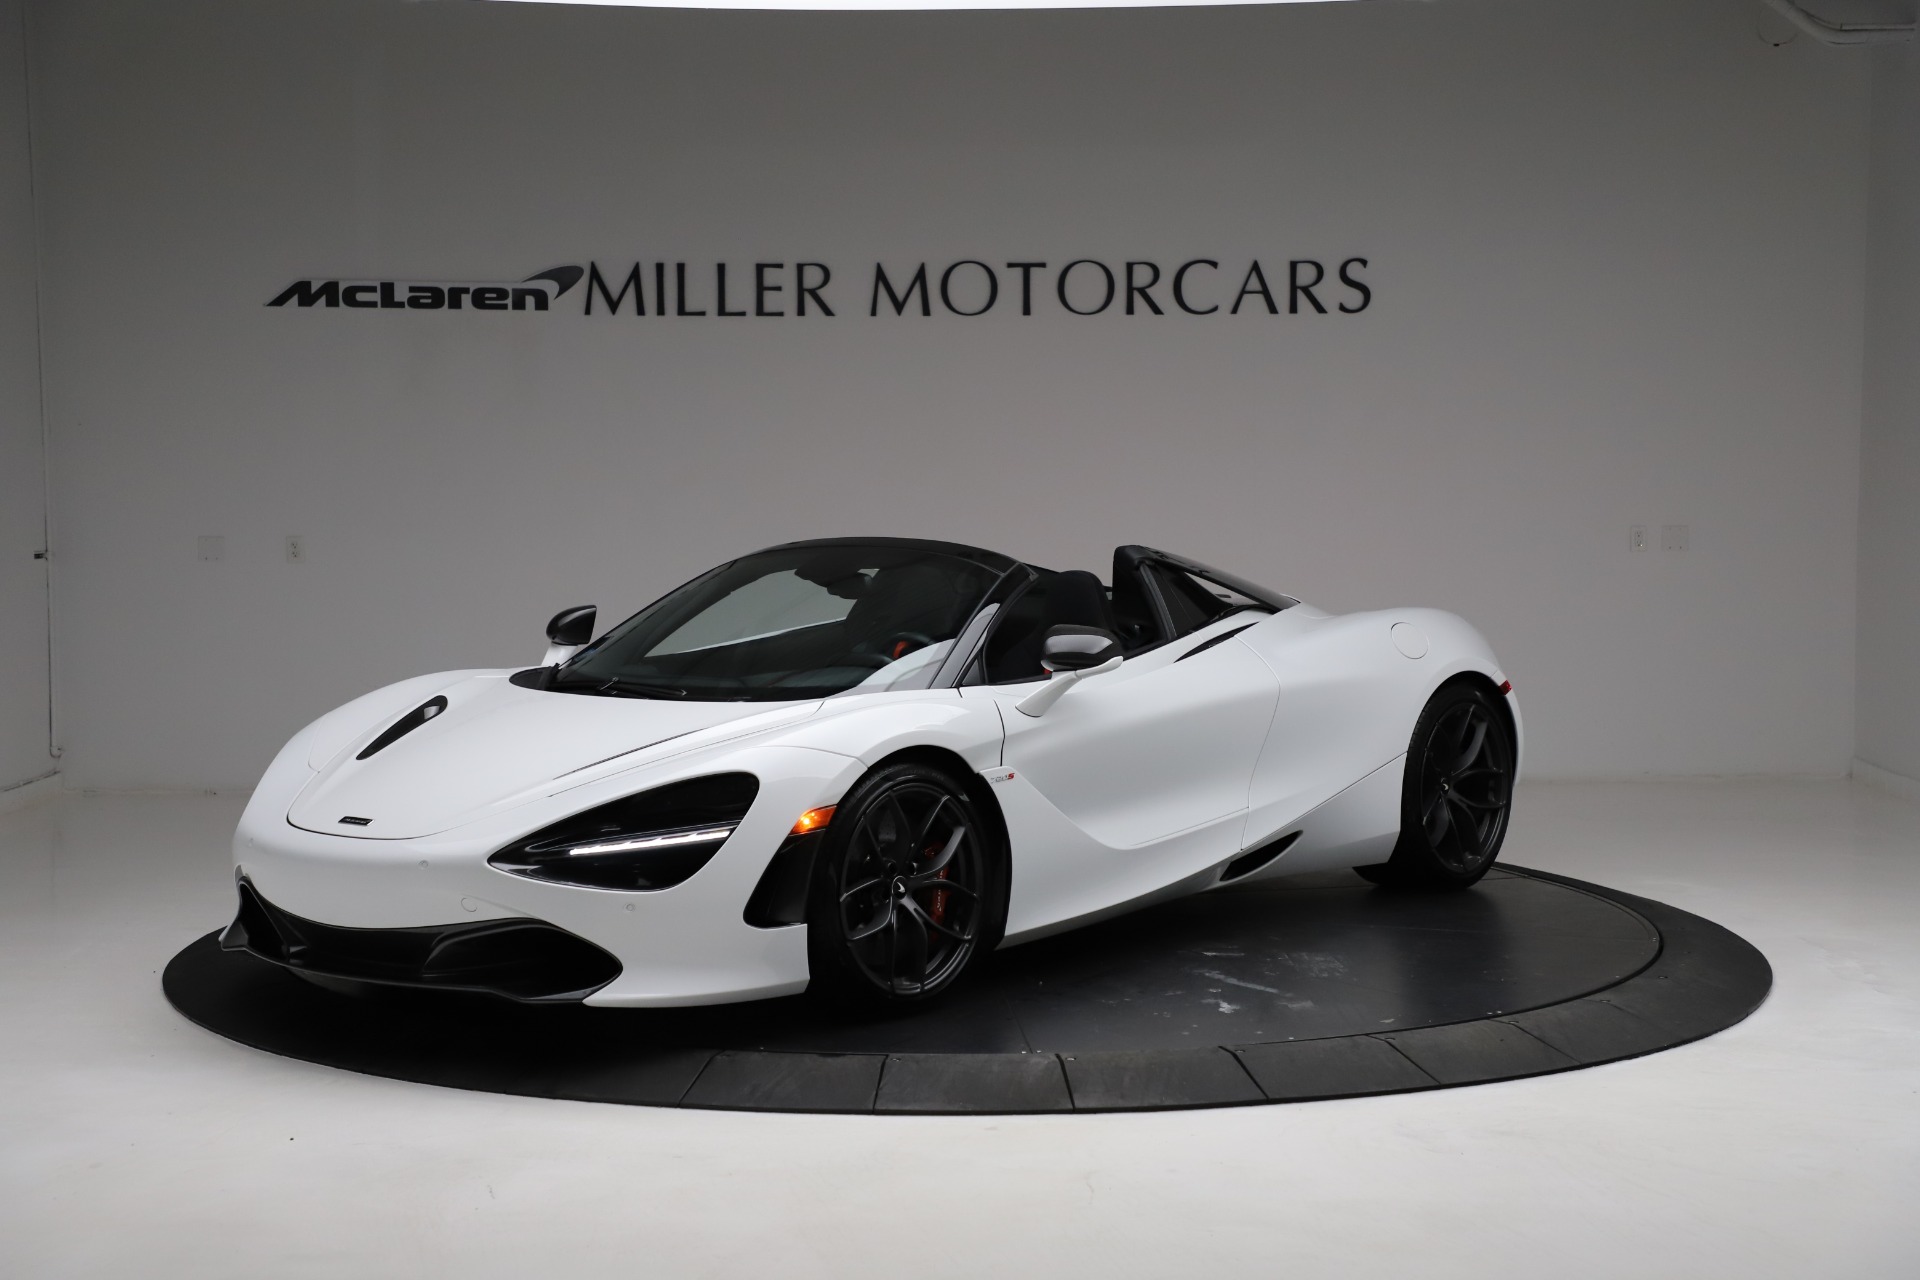 Used 2020 McLaren 720S Spider for sale Sold at Aston Martin of Greenwich in Greenwich CT 06830 1